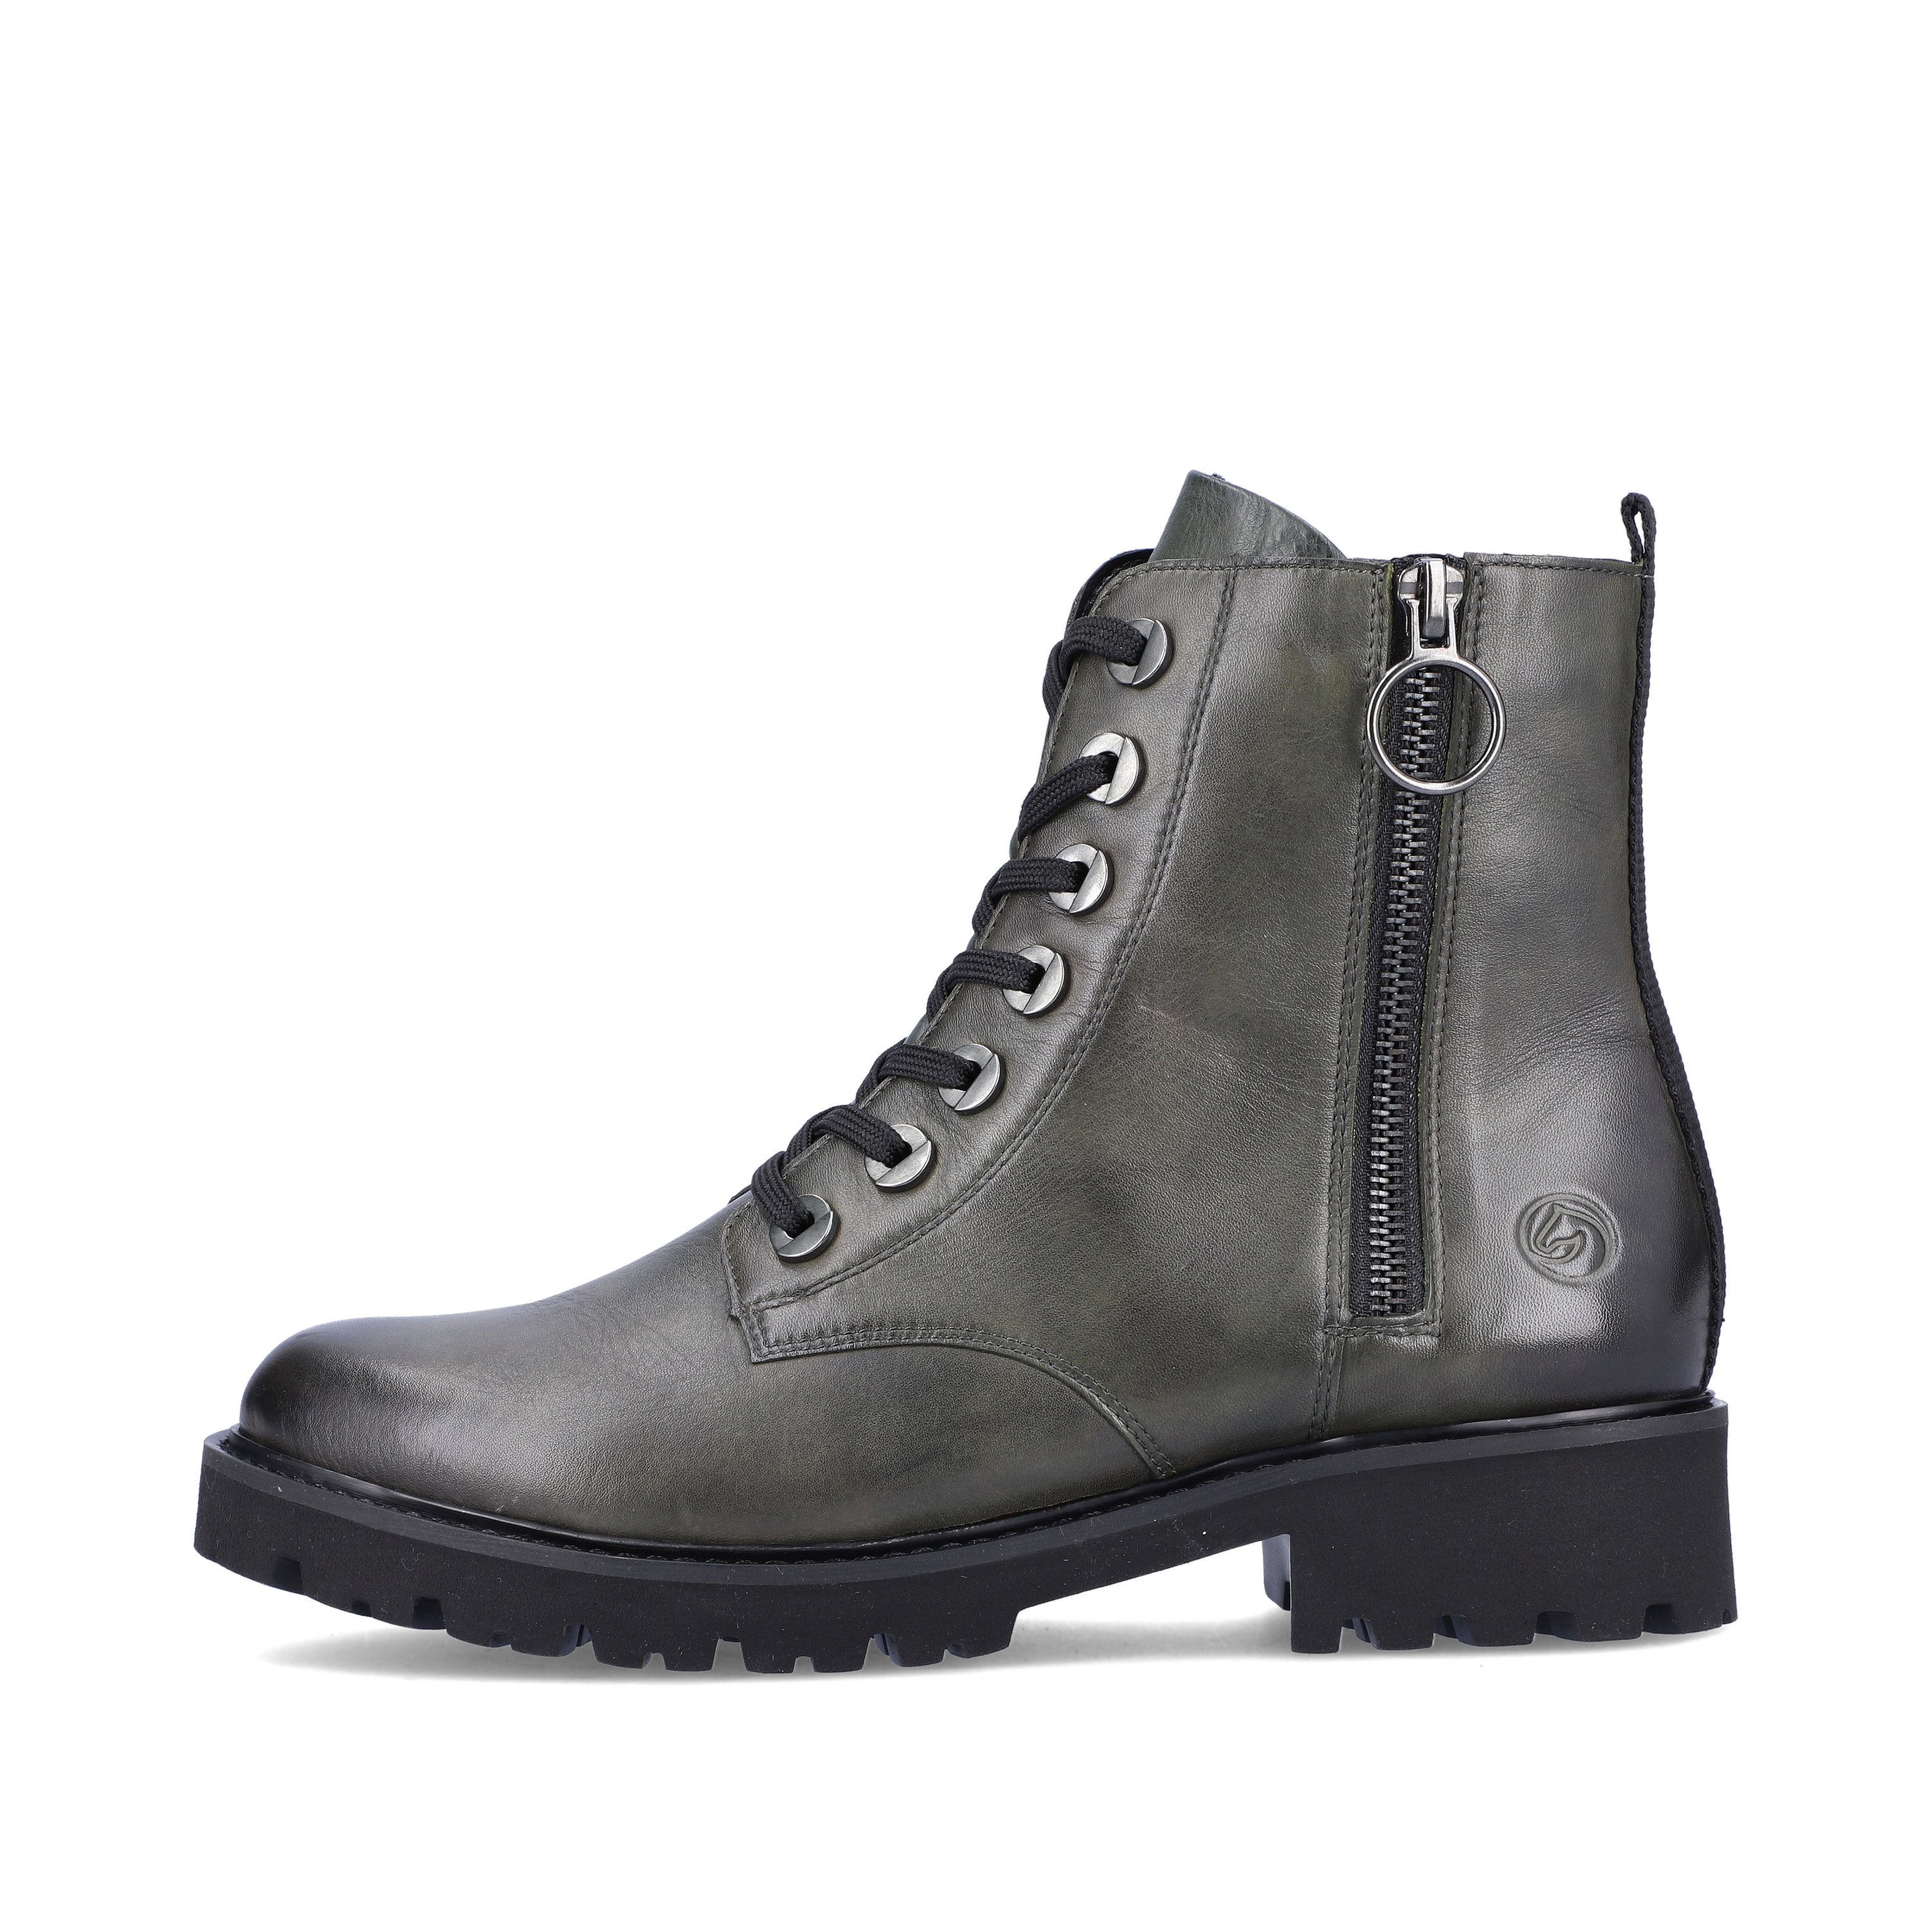 Green-grey remonte women´s biker boots D8671-52 with especially light sole. The outside of the shoe